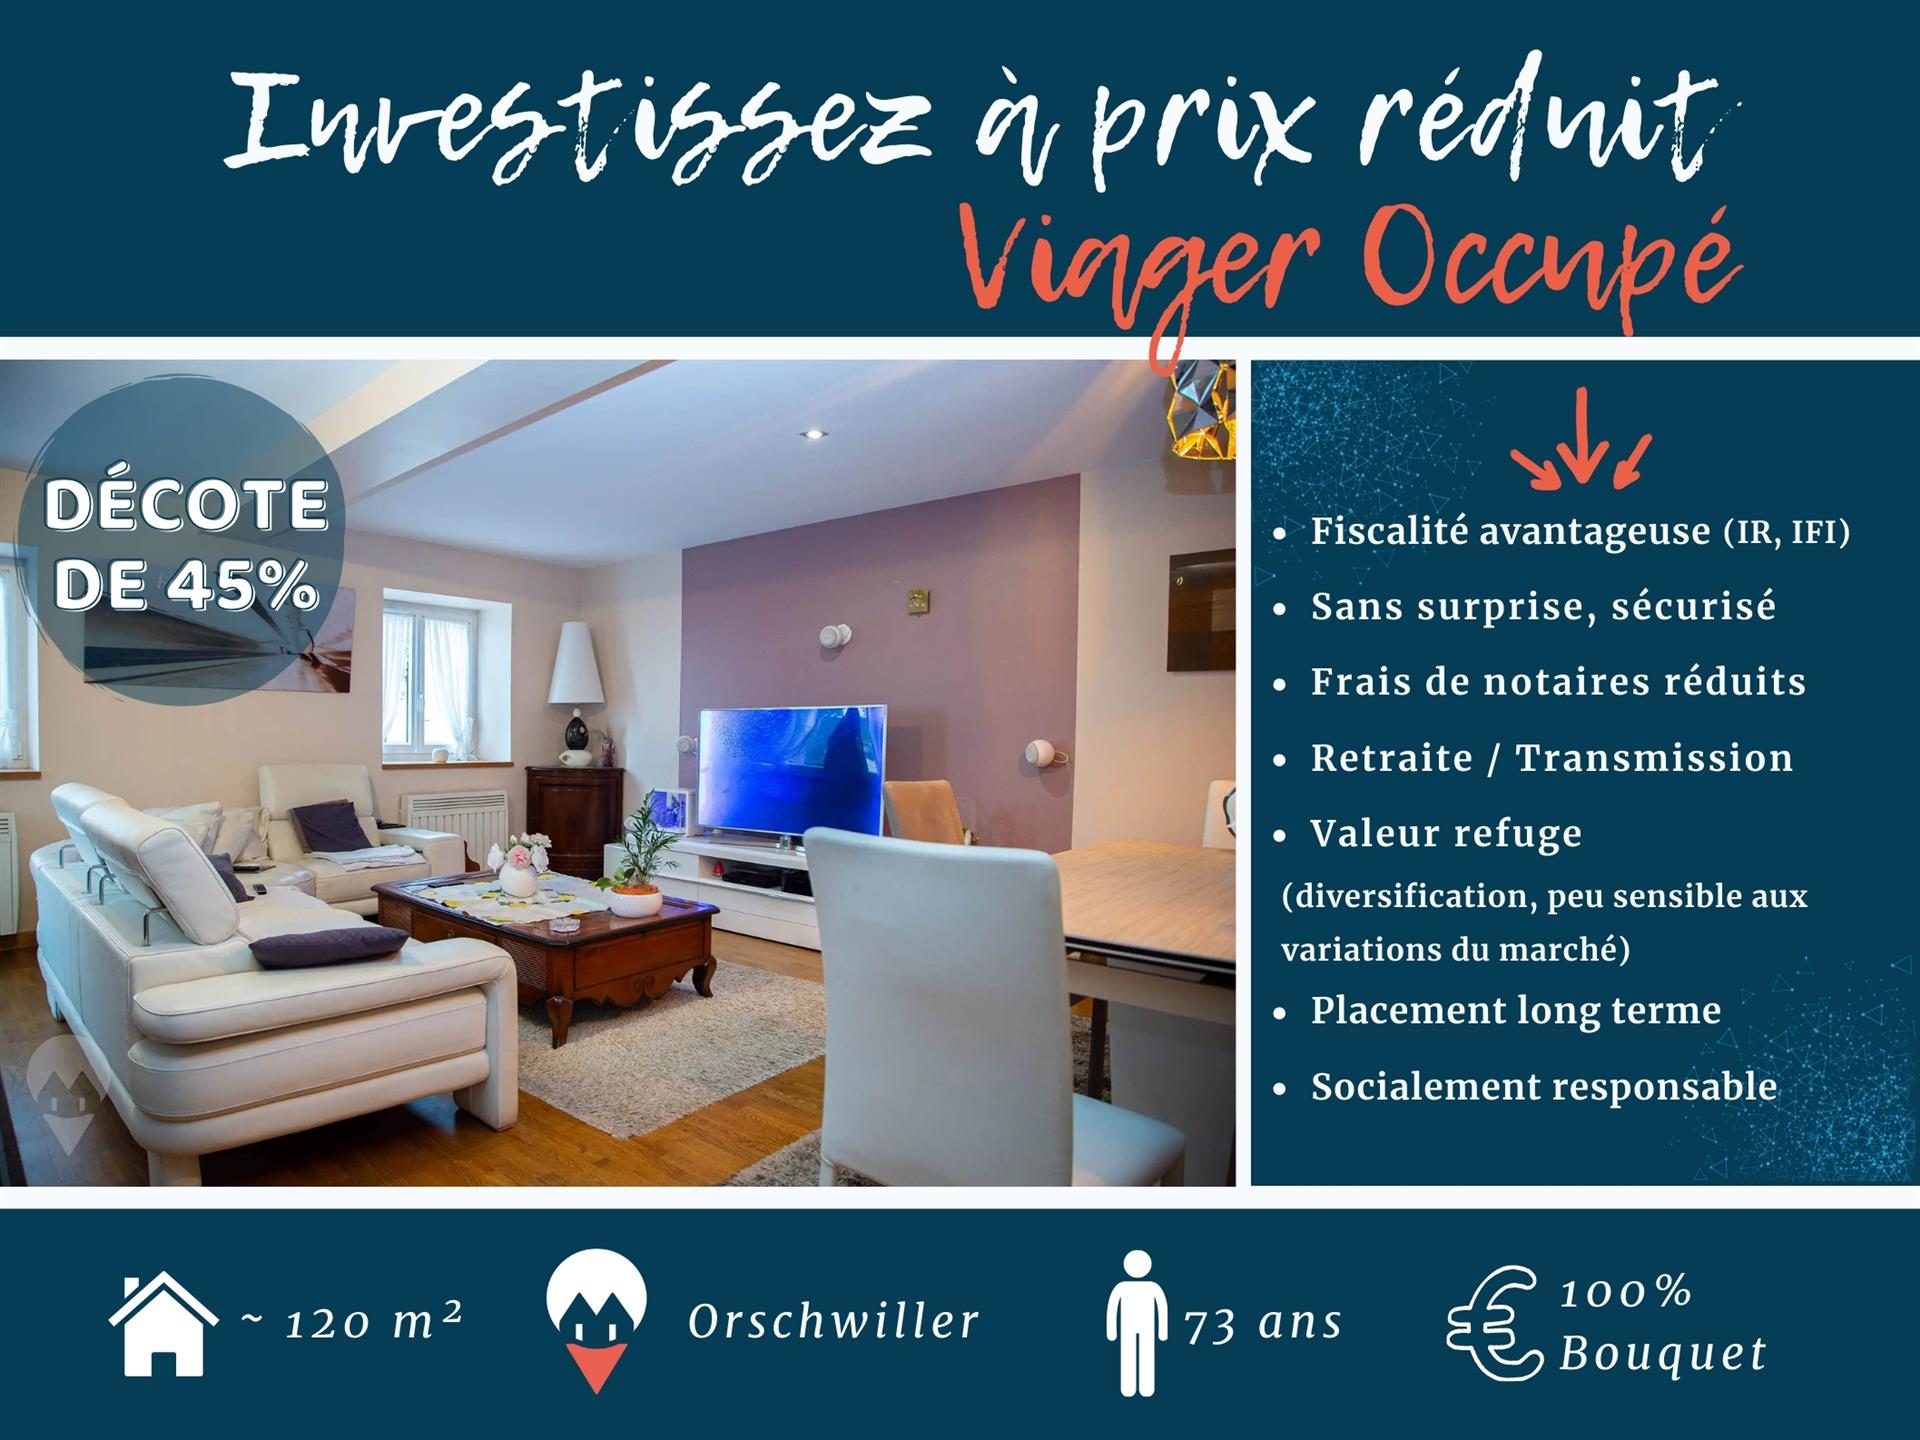 Investment opportunity just outside Sélestat with this occupied life annuity house in Orschwiller